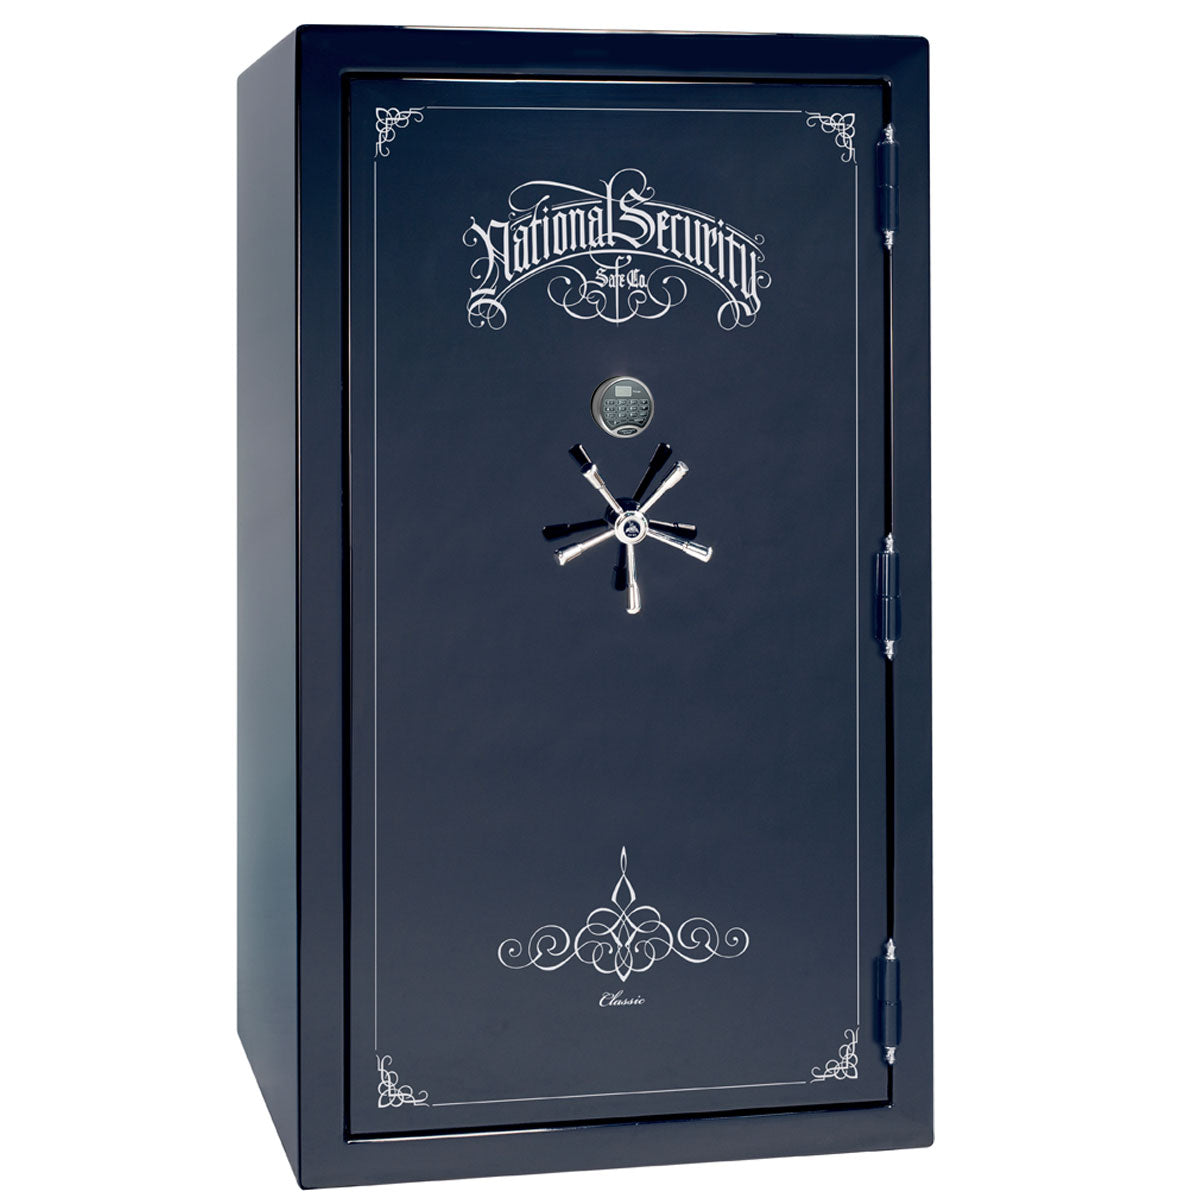 Liberty Safe Classic Plus 50 in Blue Gloss with Chrome Electronic Lock, closed door.